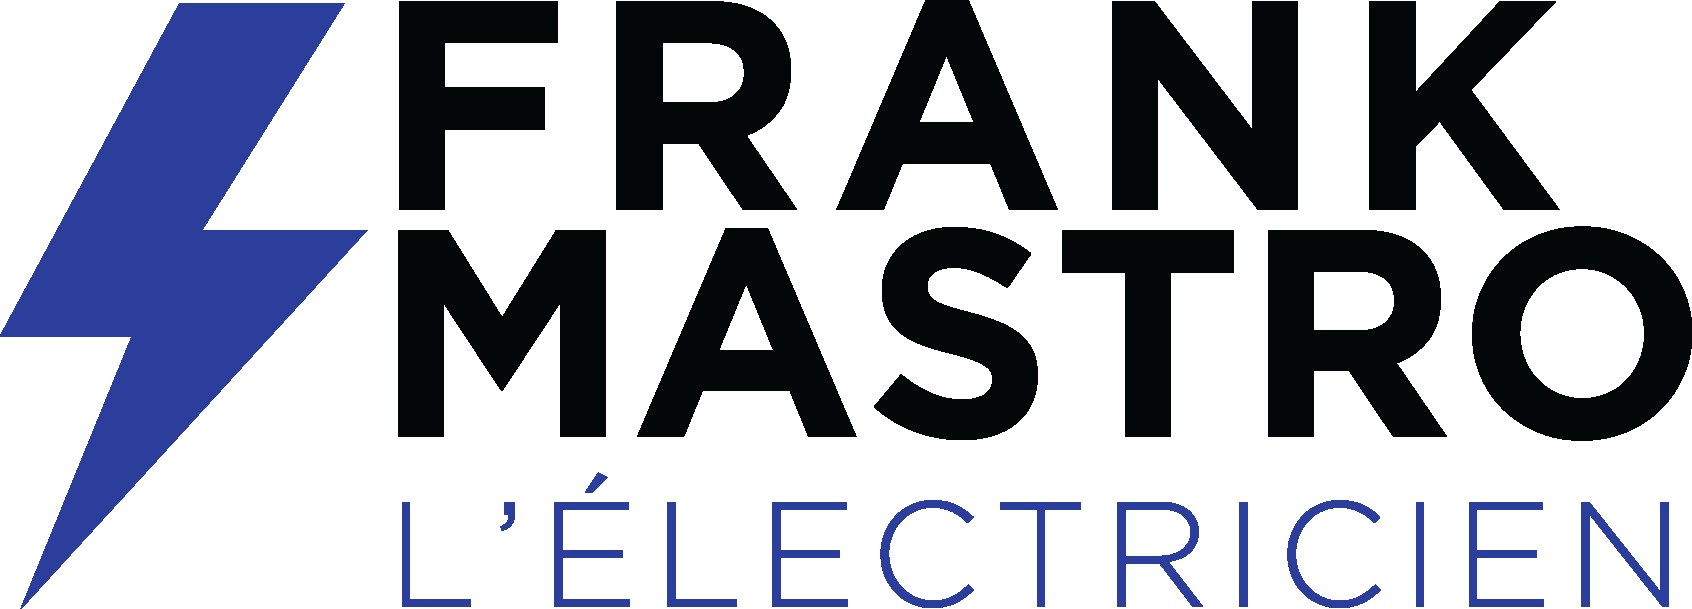 a logo for frank mastro l' electricien with a lightning bolt